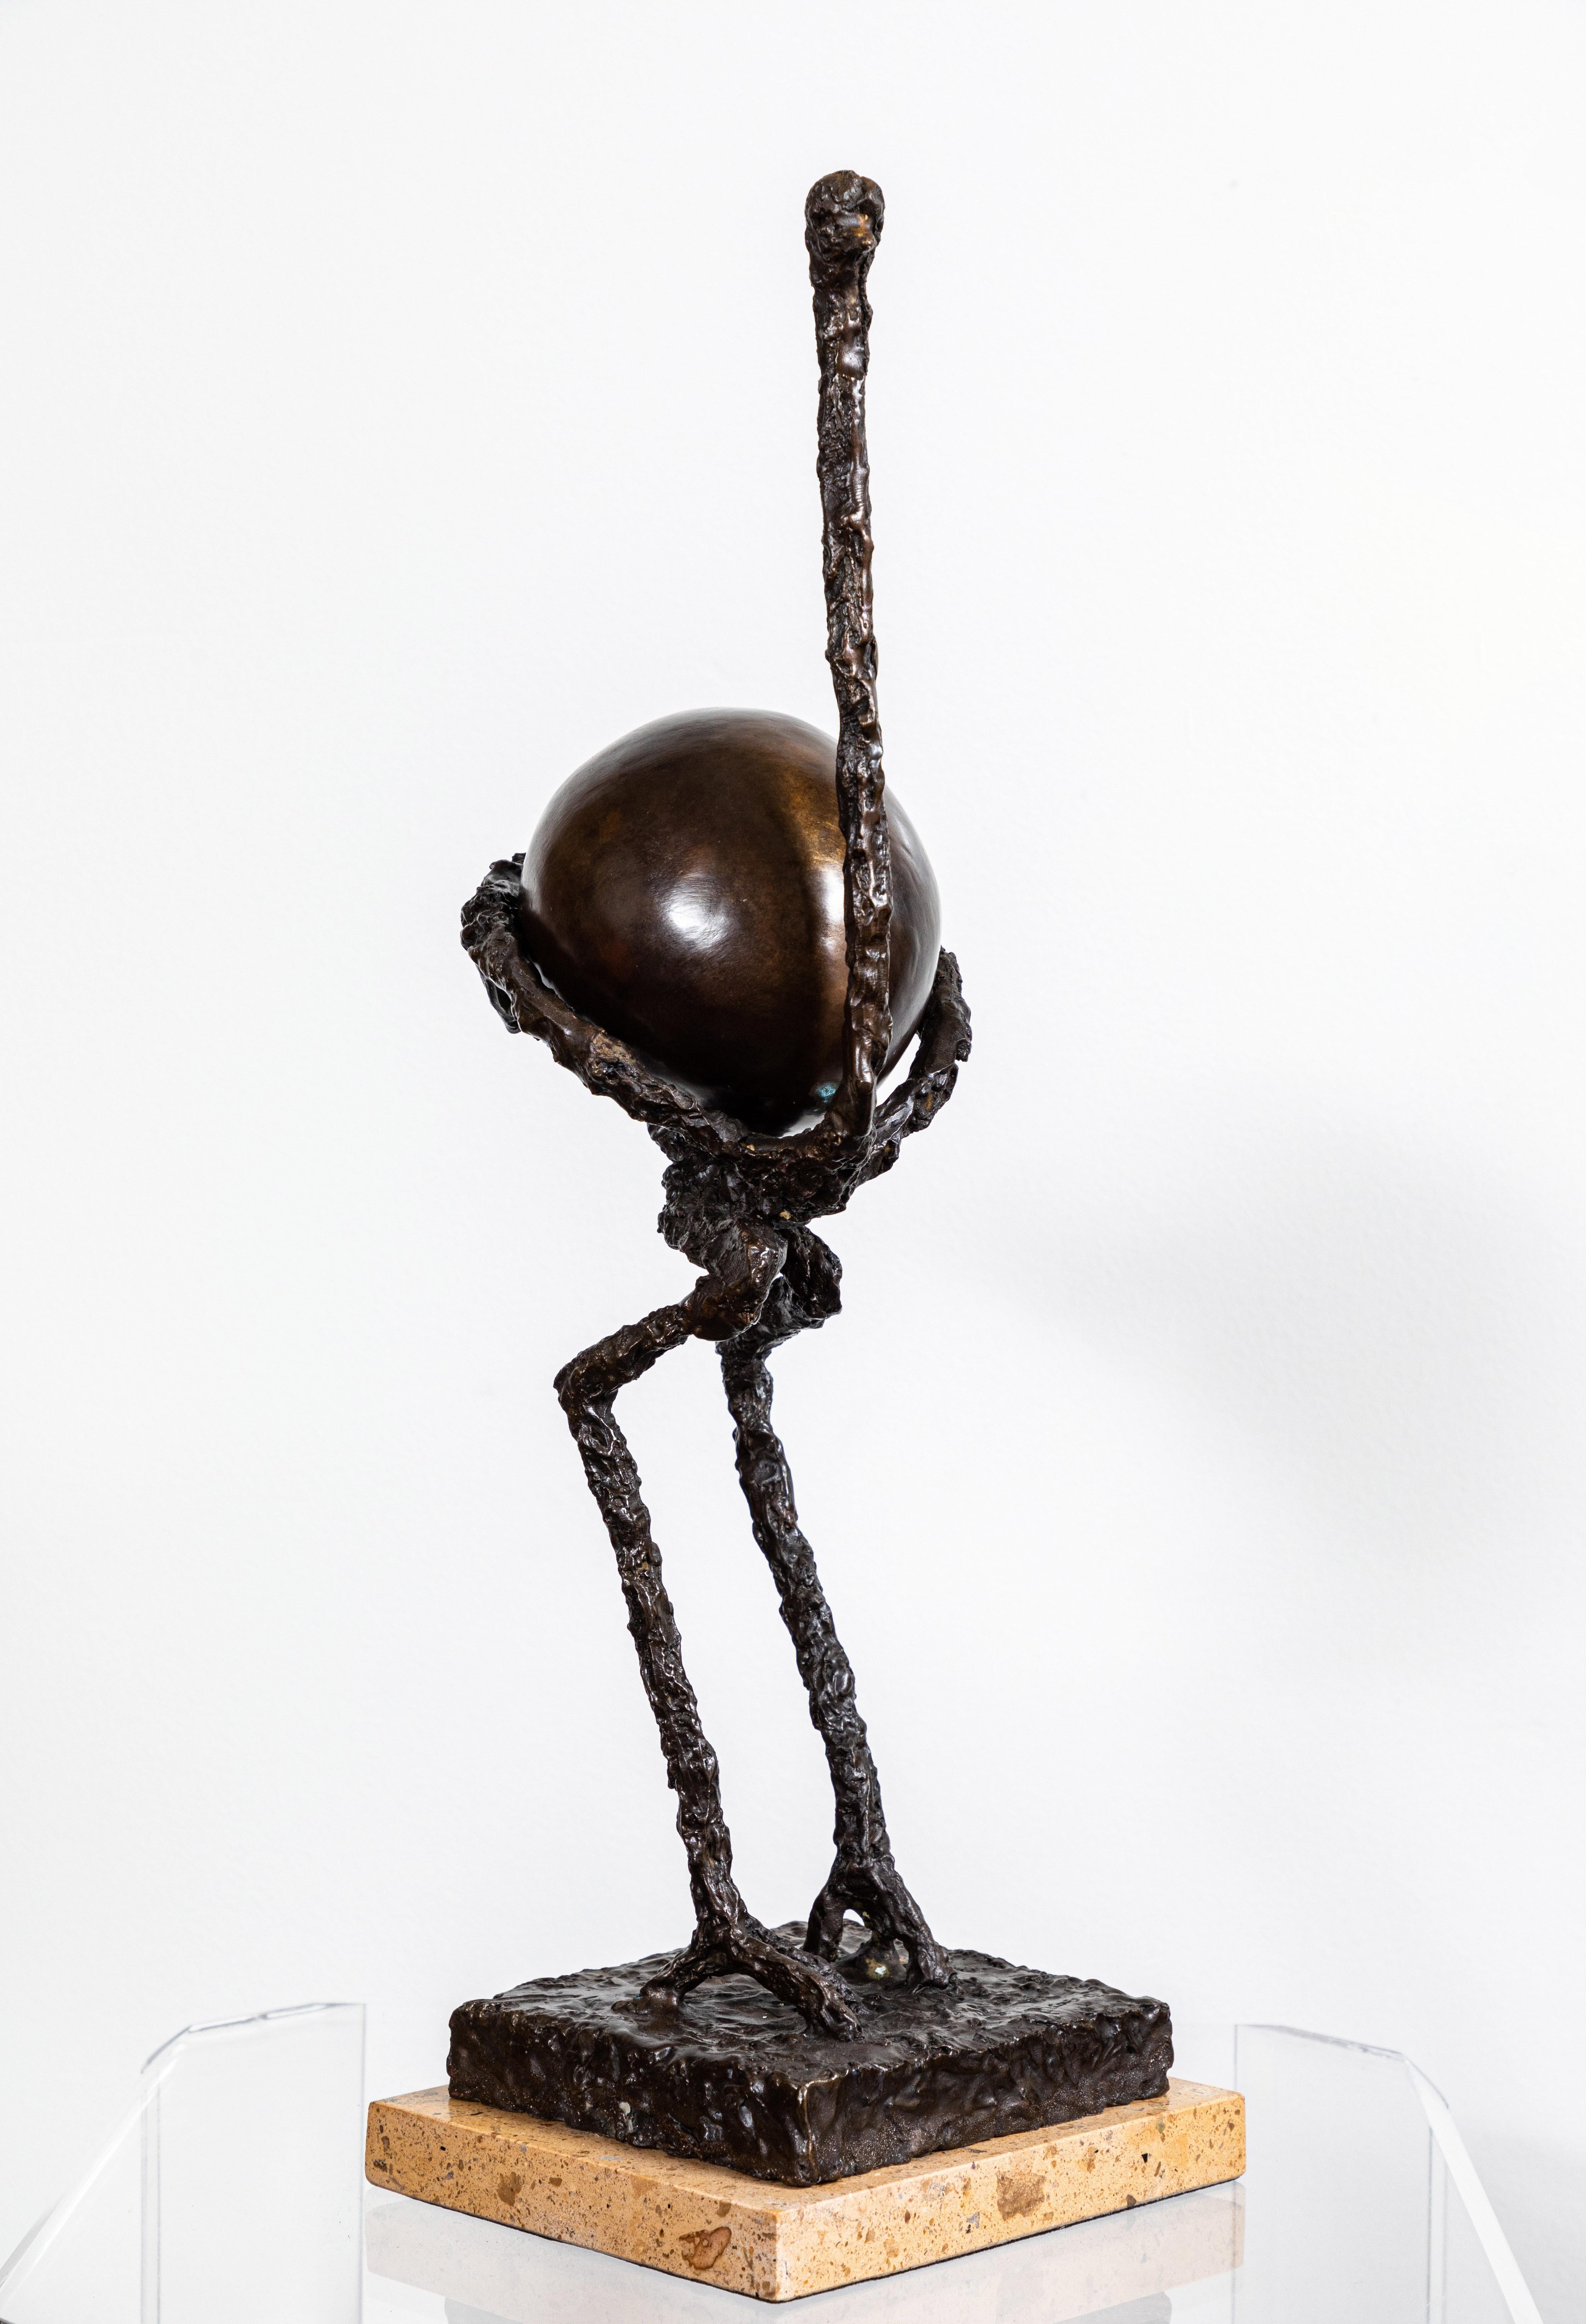 Whimsical bronze ostrich sculpture reminiscent of the designs of Giacometti. The ostrich egg, also of bronze, sits in the body of the sculpture and is not attached. Unsigned, circa 1980s.